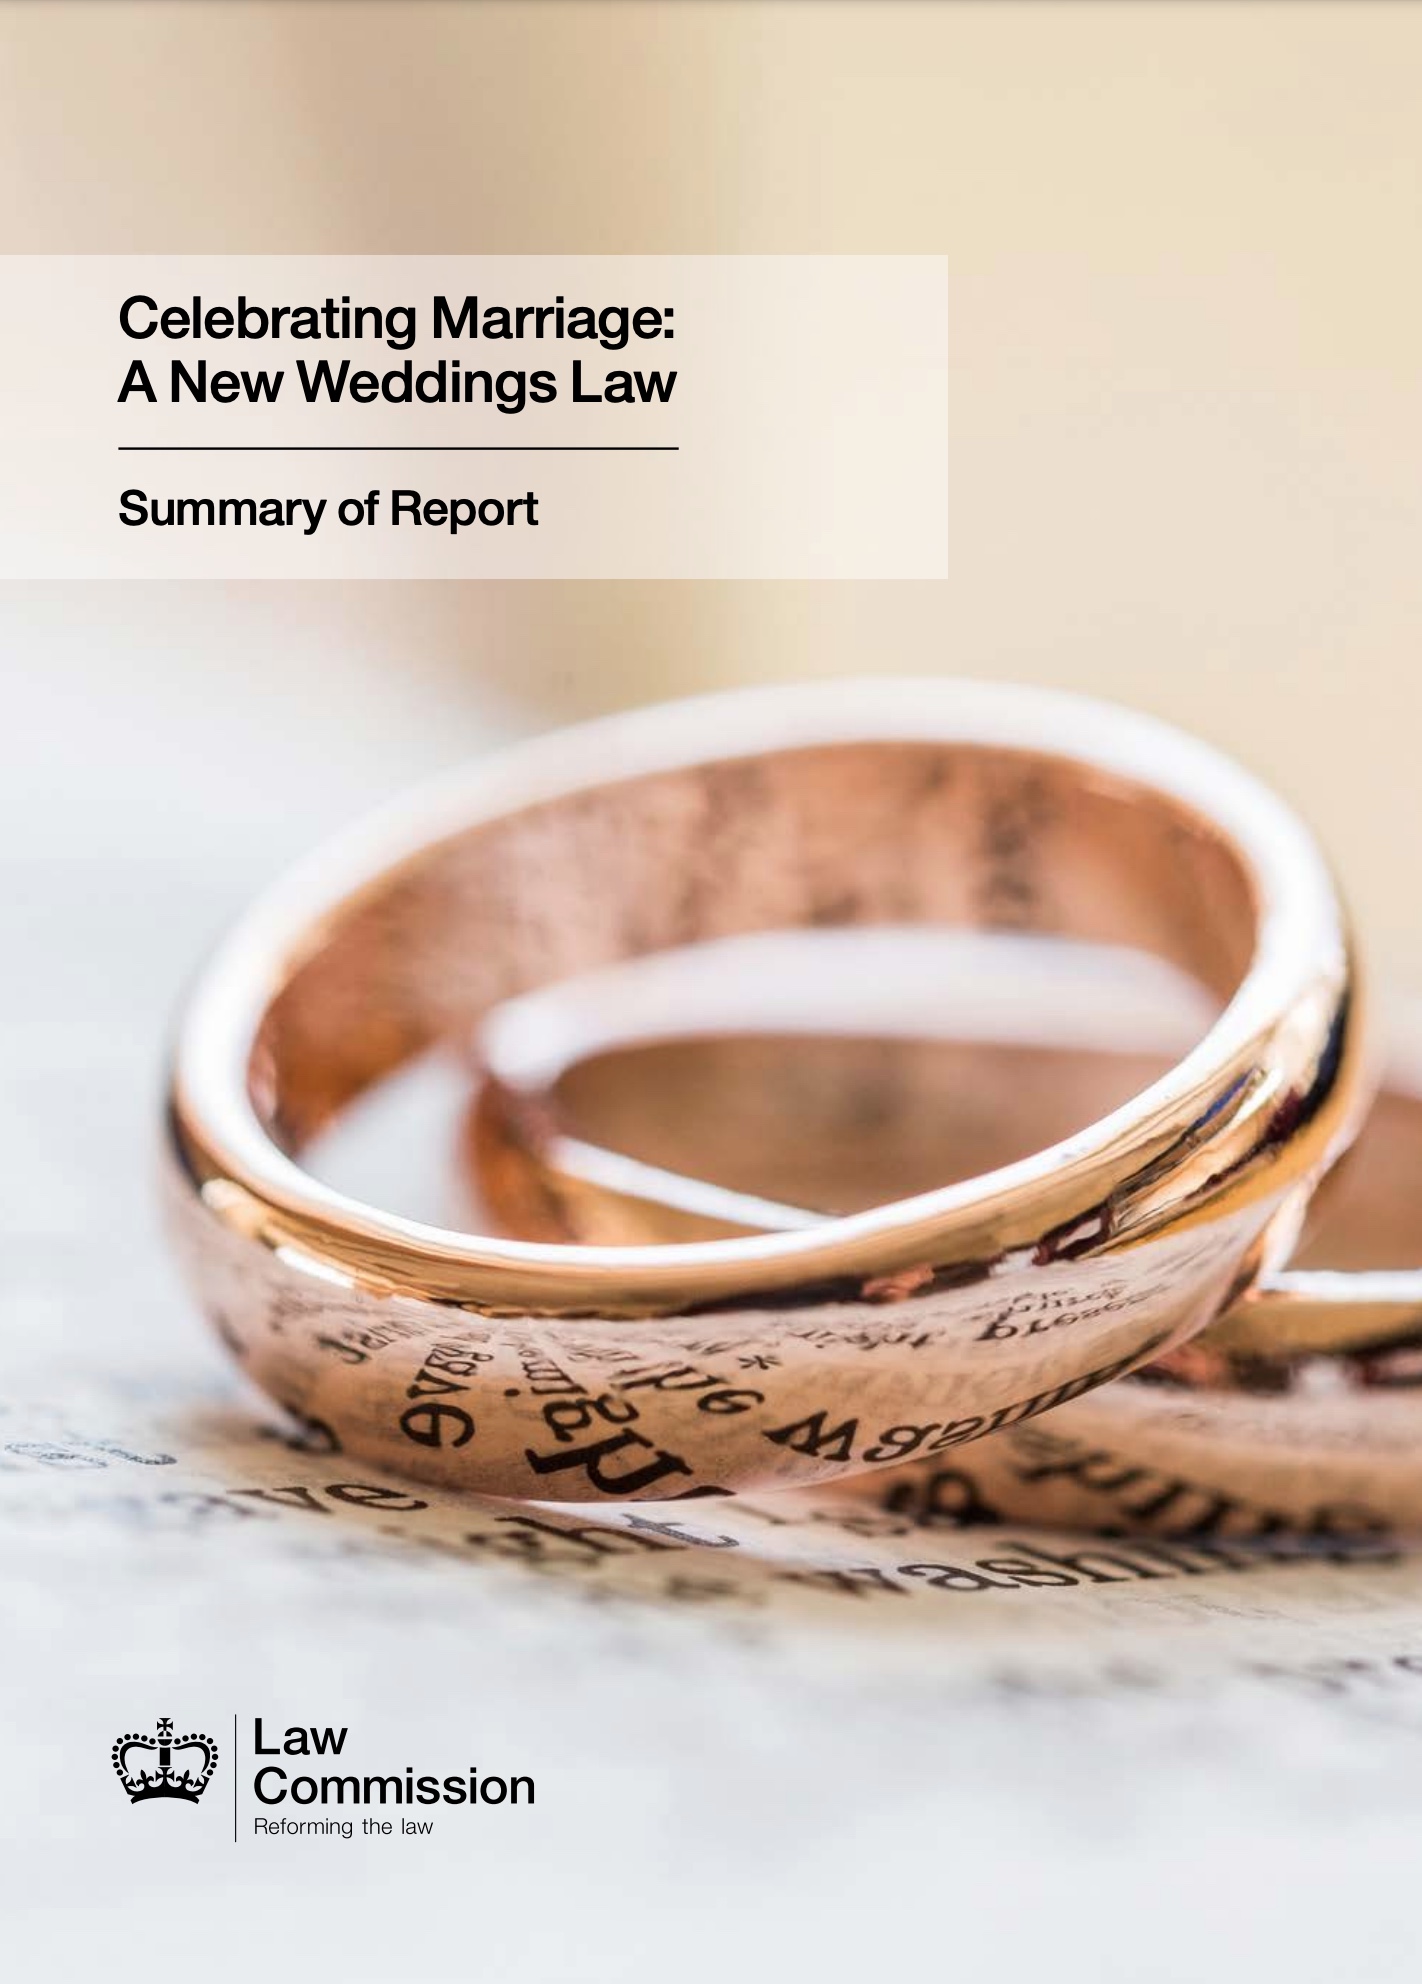 The Law Commission Report: Celebrating Marriage, A New Weddings Law | Love My Dress®